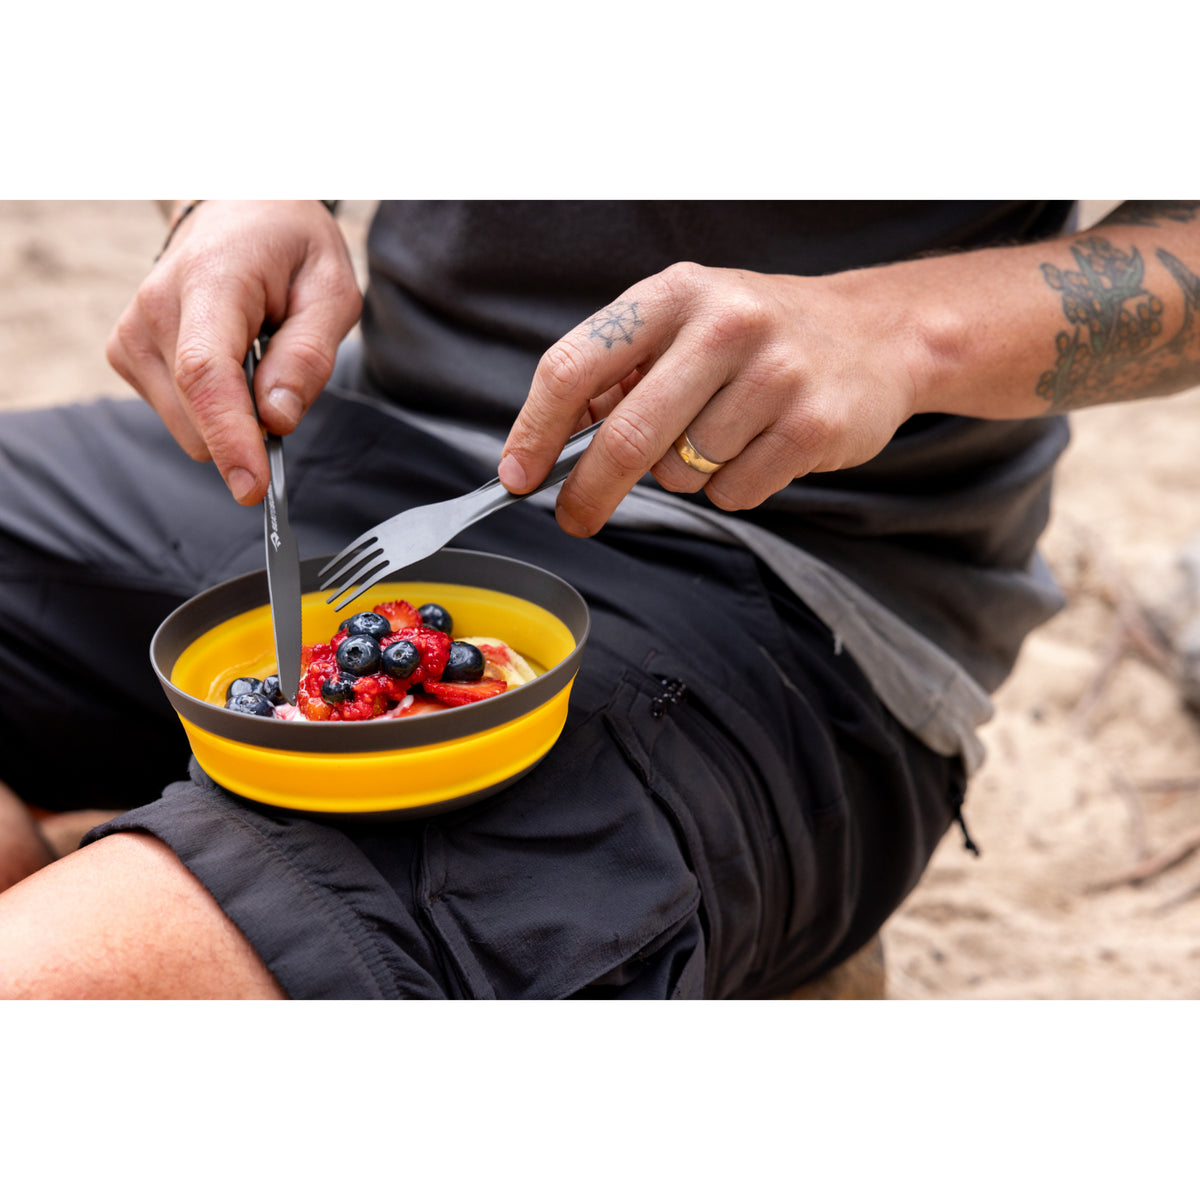 Sea to Summit Frontier Collapsible Bowl - Medium